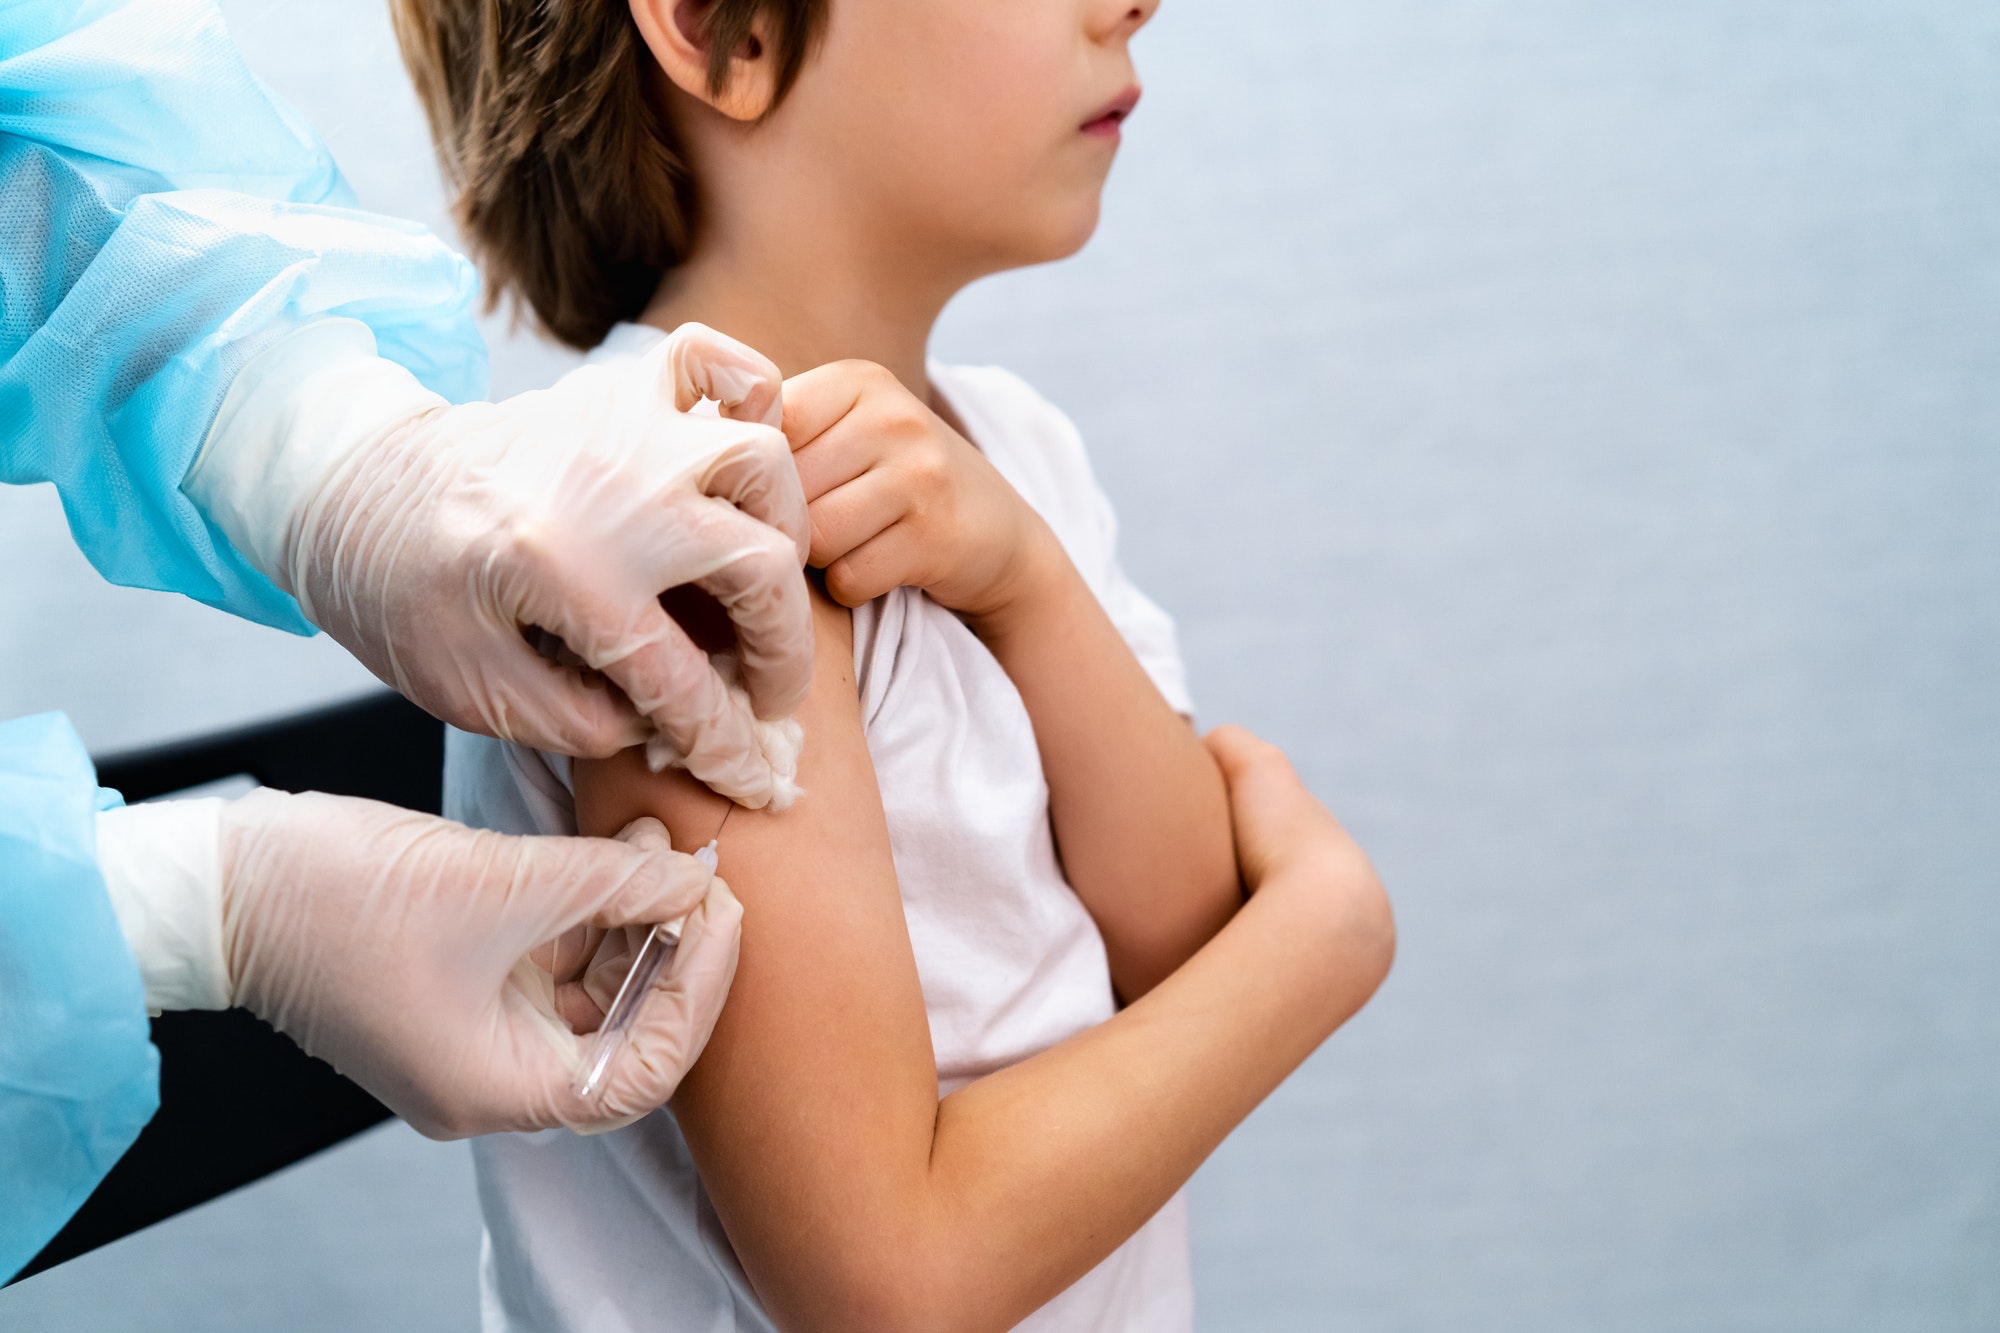 Vaccination of a child